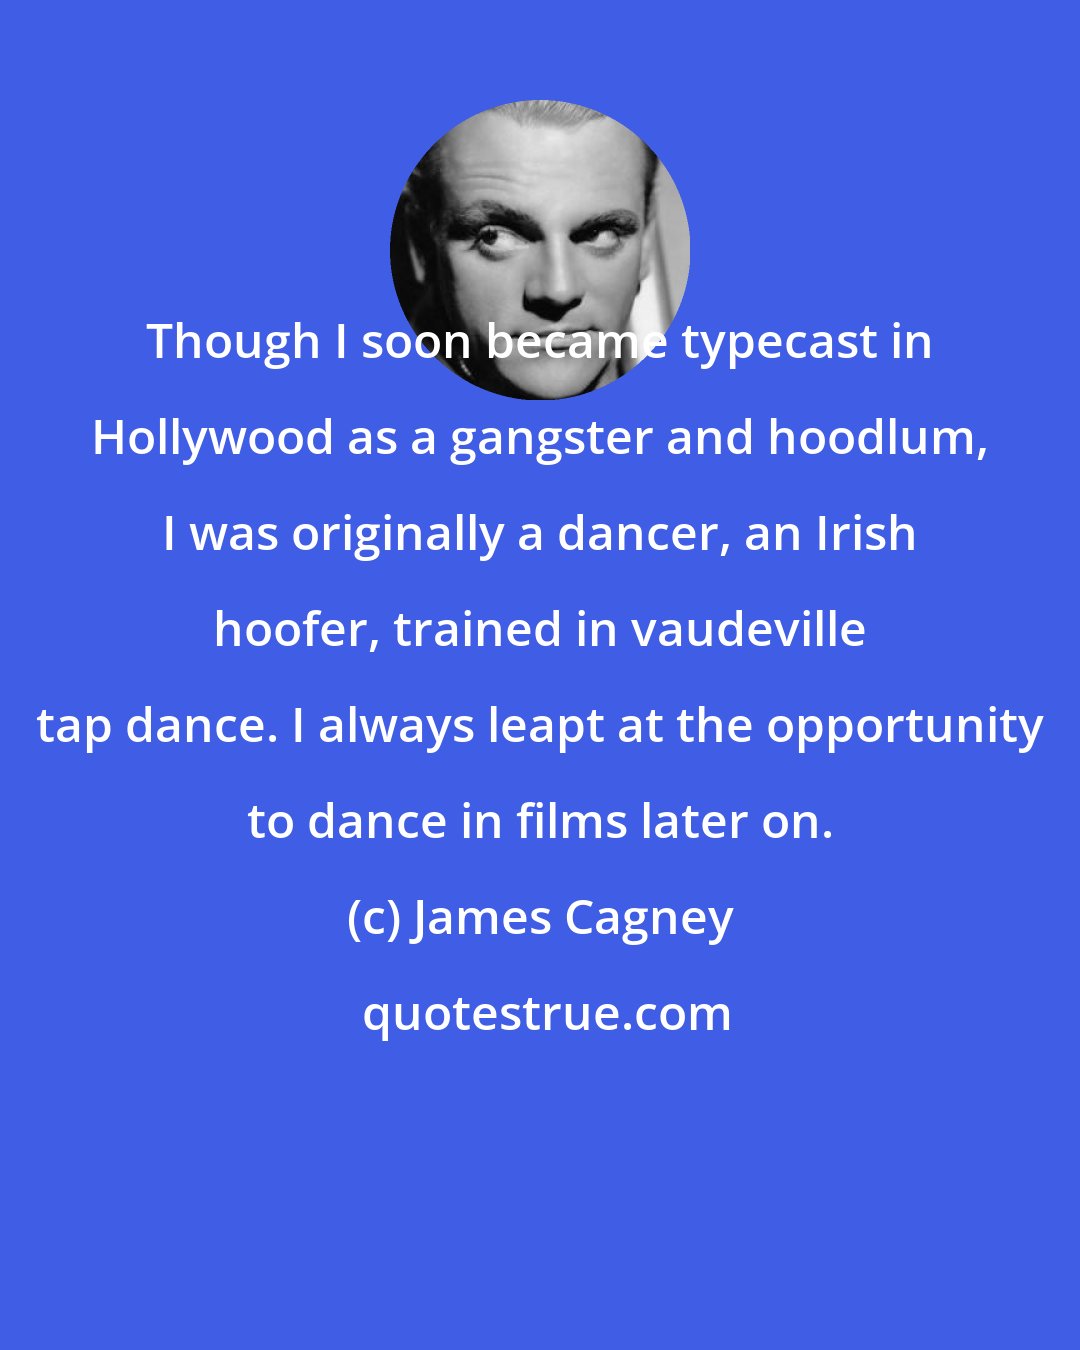 James Cagney: Though I soon became typecast in Hollywood as a gangster and hoodlum, I was originally a dancer, an Irish hoofer, trained in vaudeville tap dance. I always leapt at the opportunity to dance in films later on.